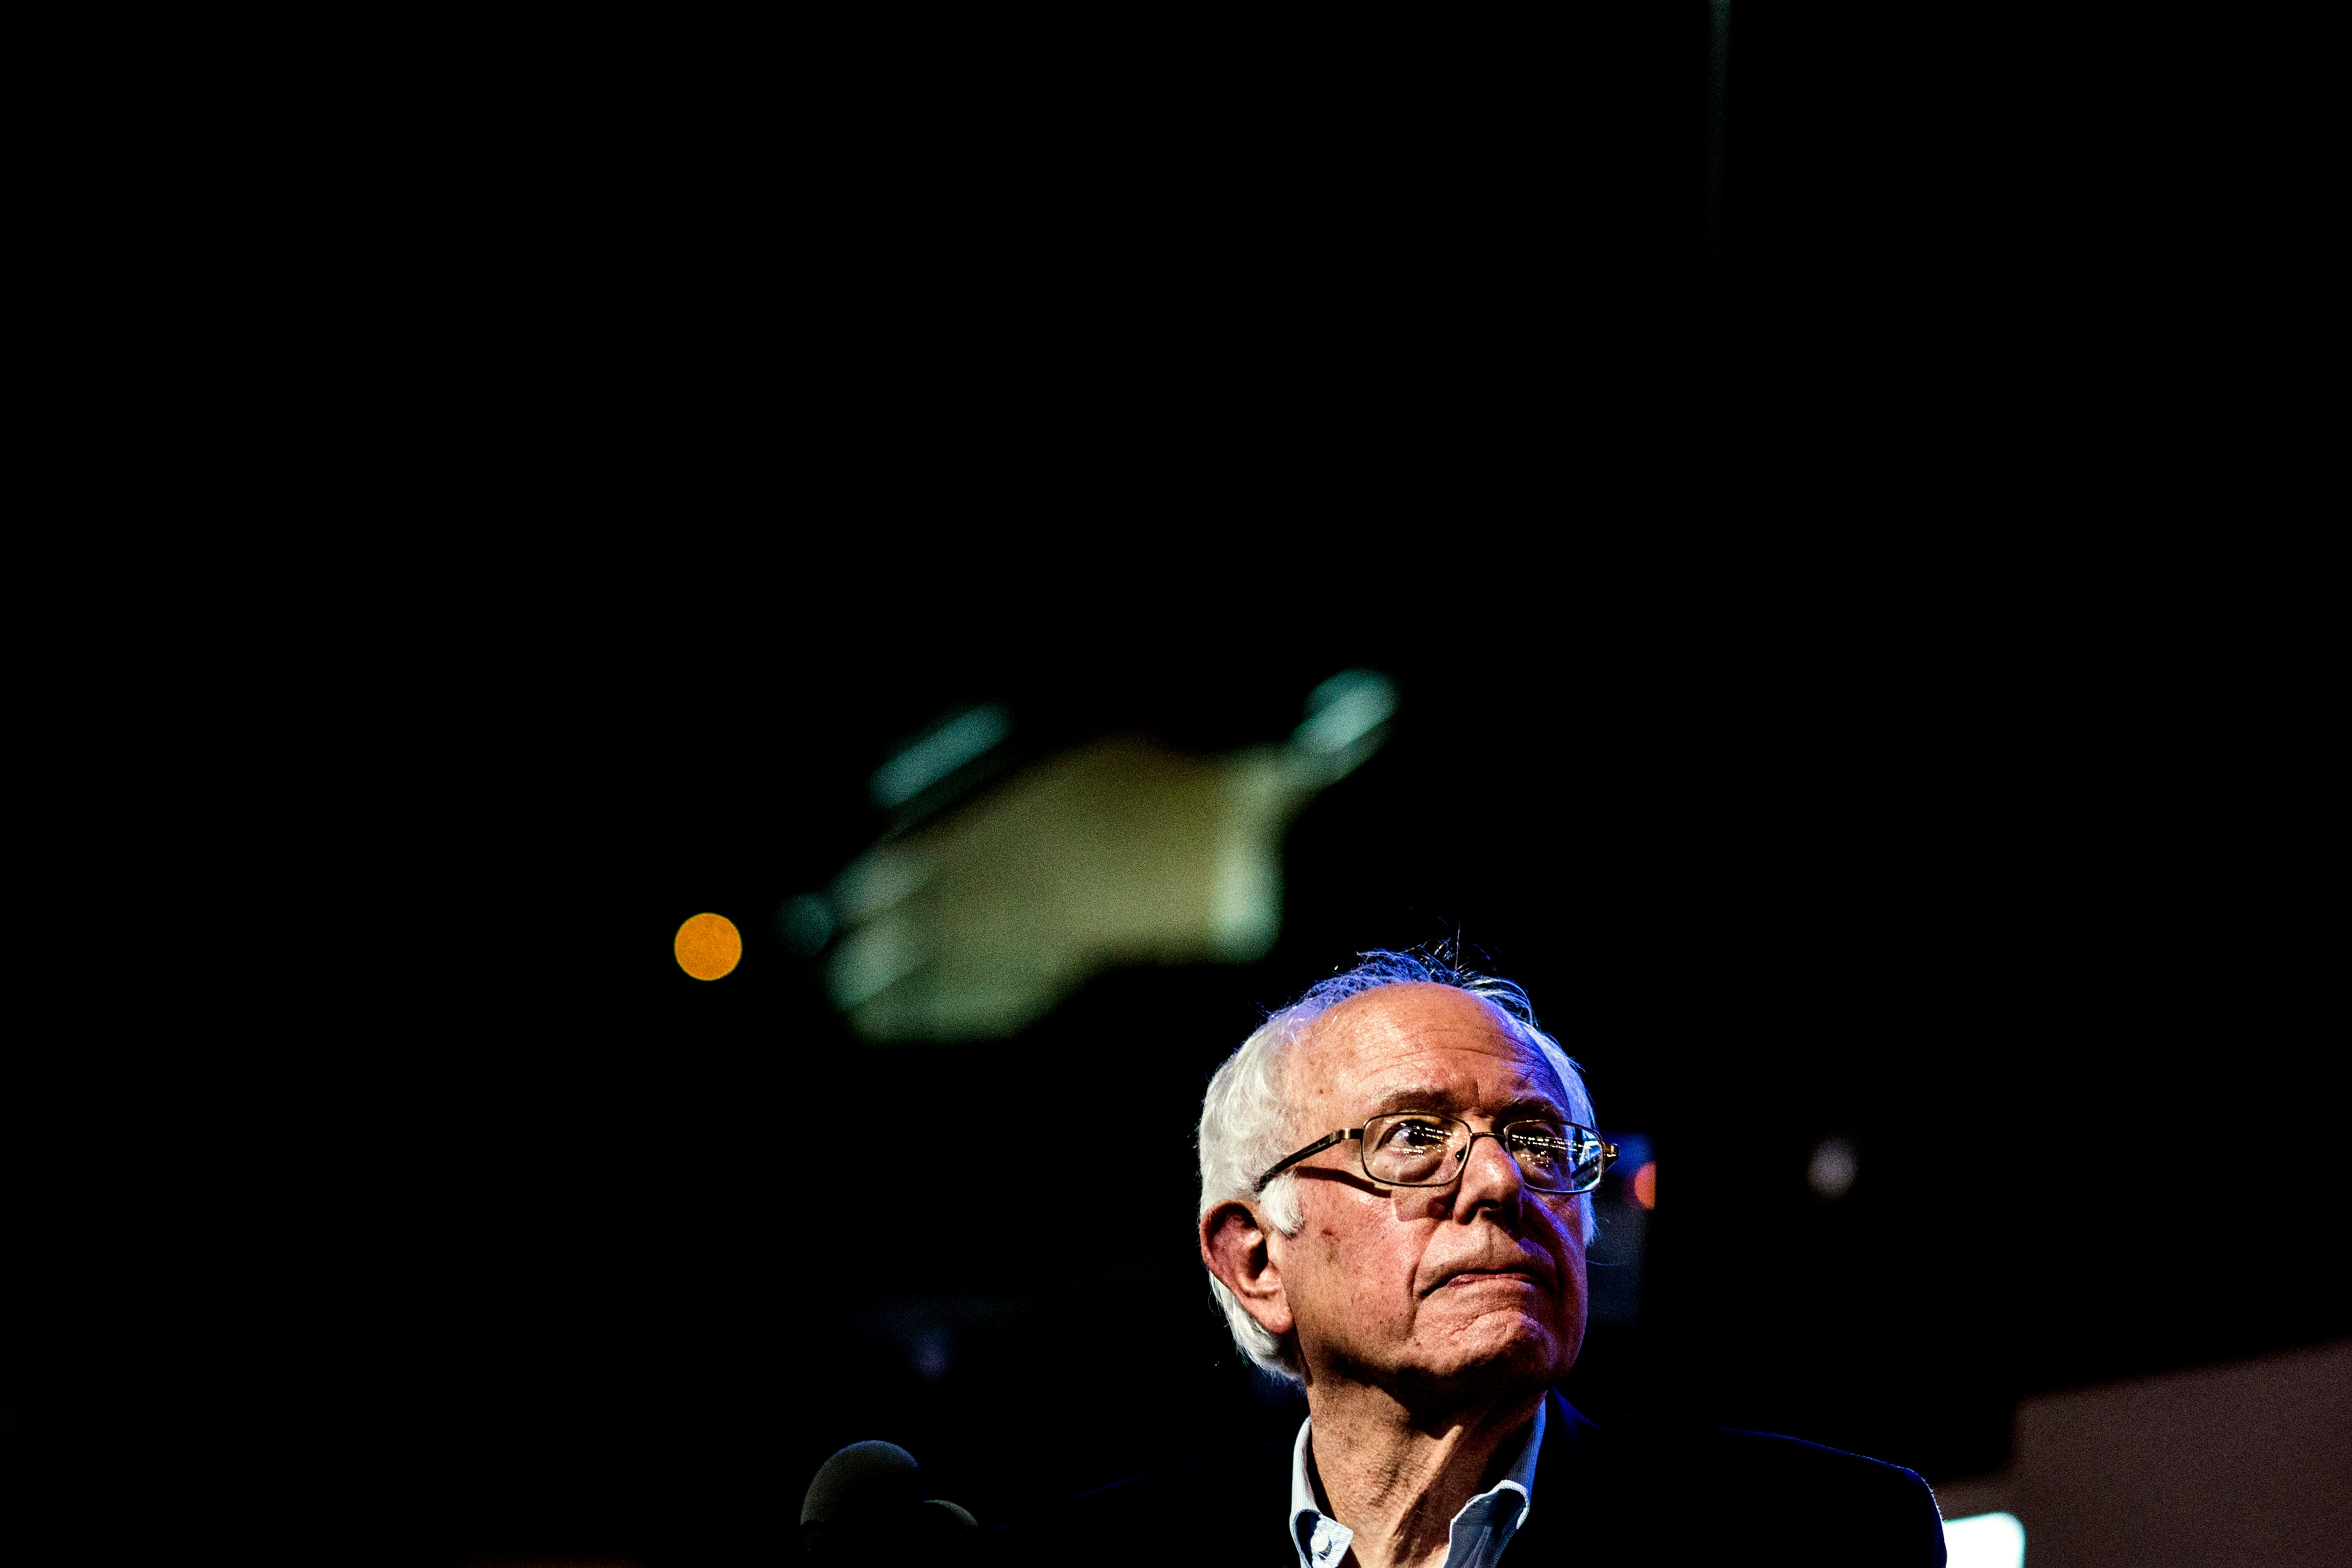 Vermont Sen. Bernie Sanders speaks at the Democratic National Convention on July 25, 2016, in Philadelphia. (Benjamin Lowy for TIME)